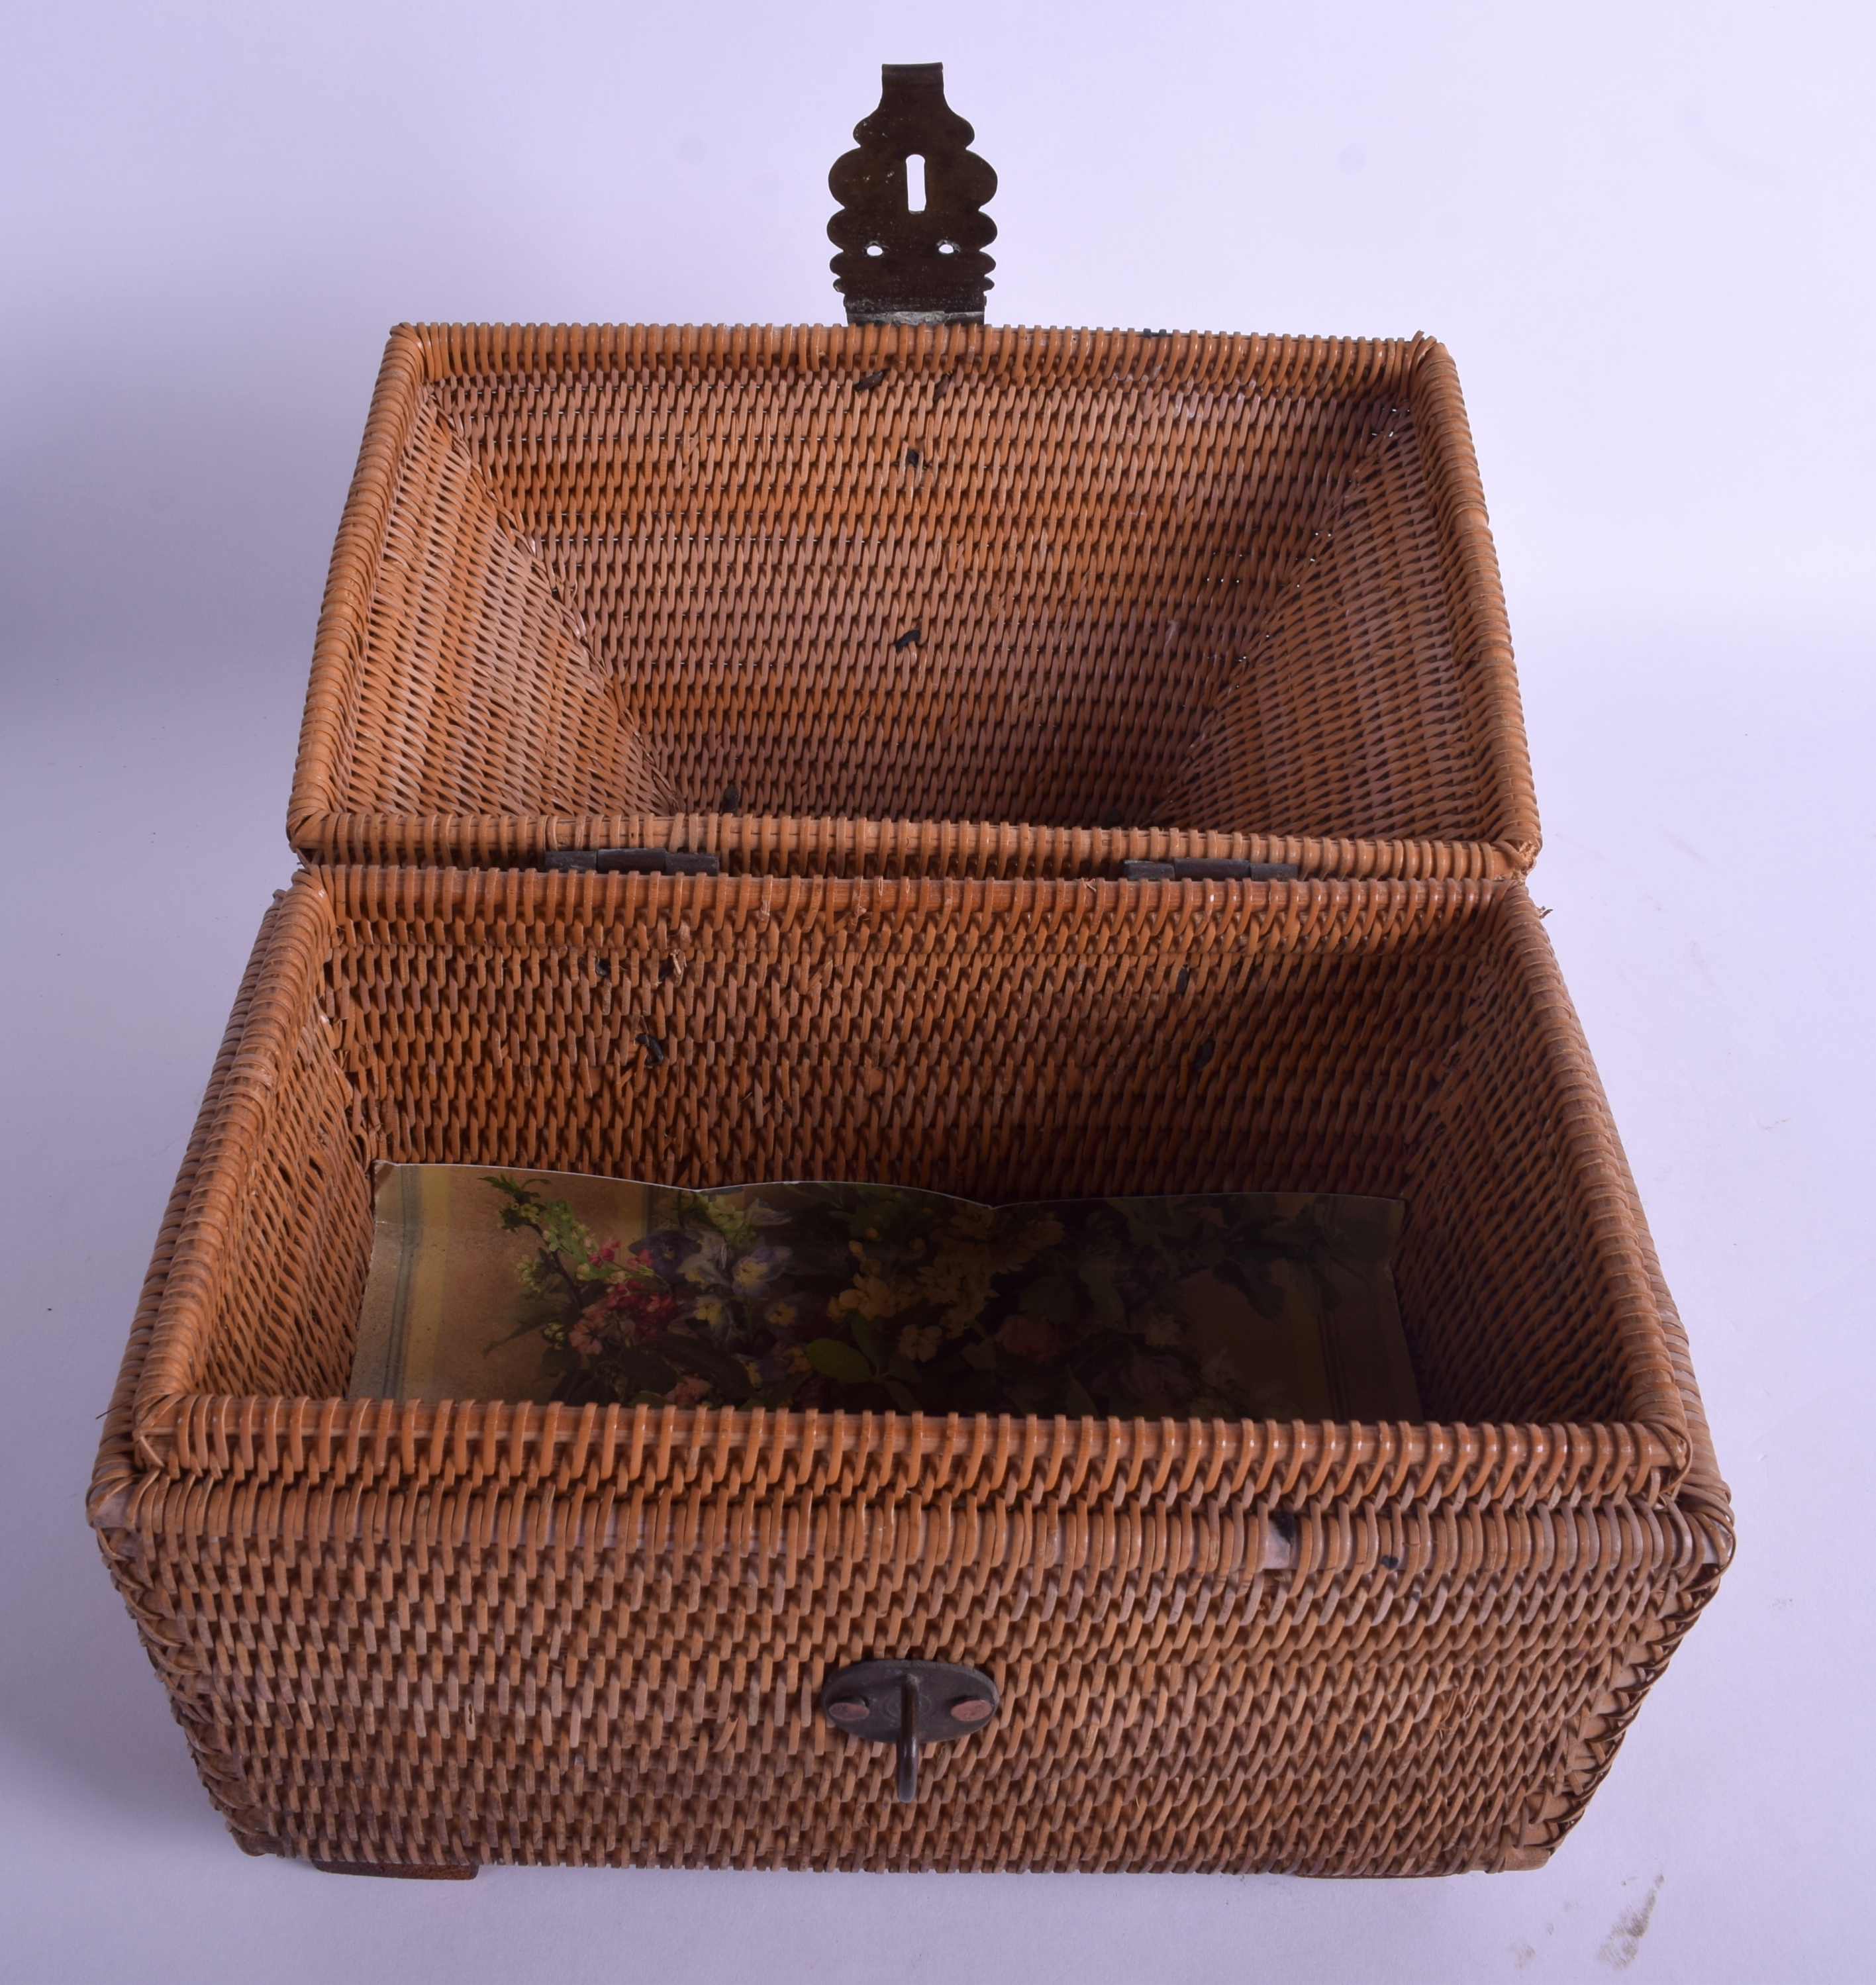 AN EARLY 20TH CENTURY INDIAN WICKER AND BRASS BOX of triangular form. 23 cm x 26 cm. - Image 3 of 3